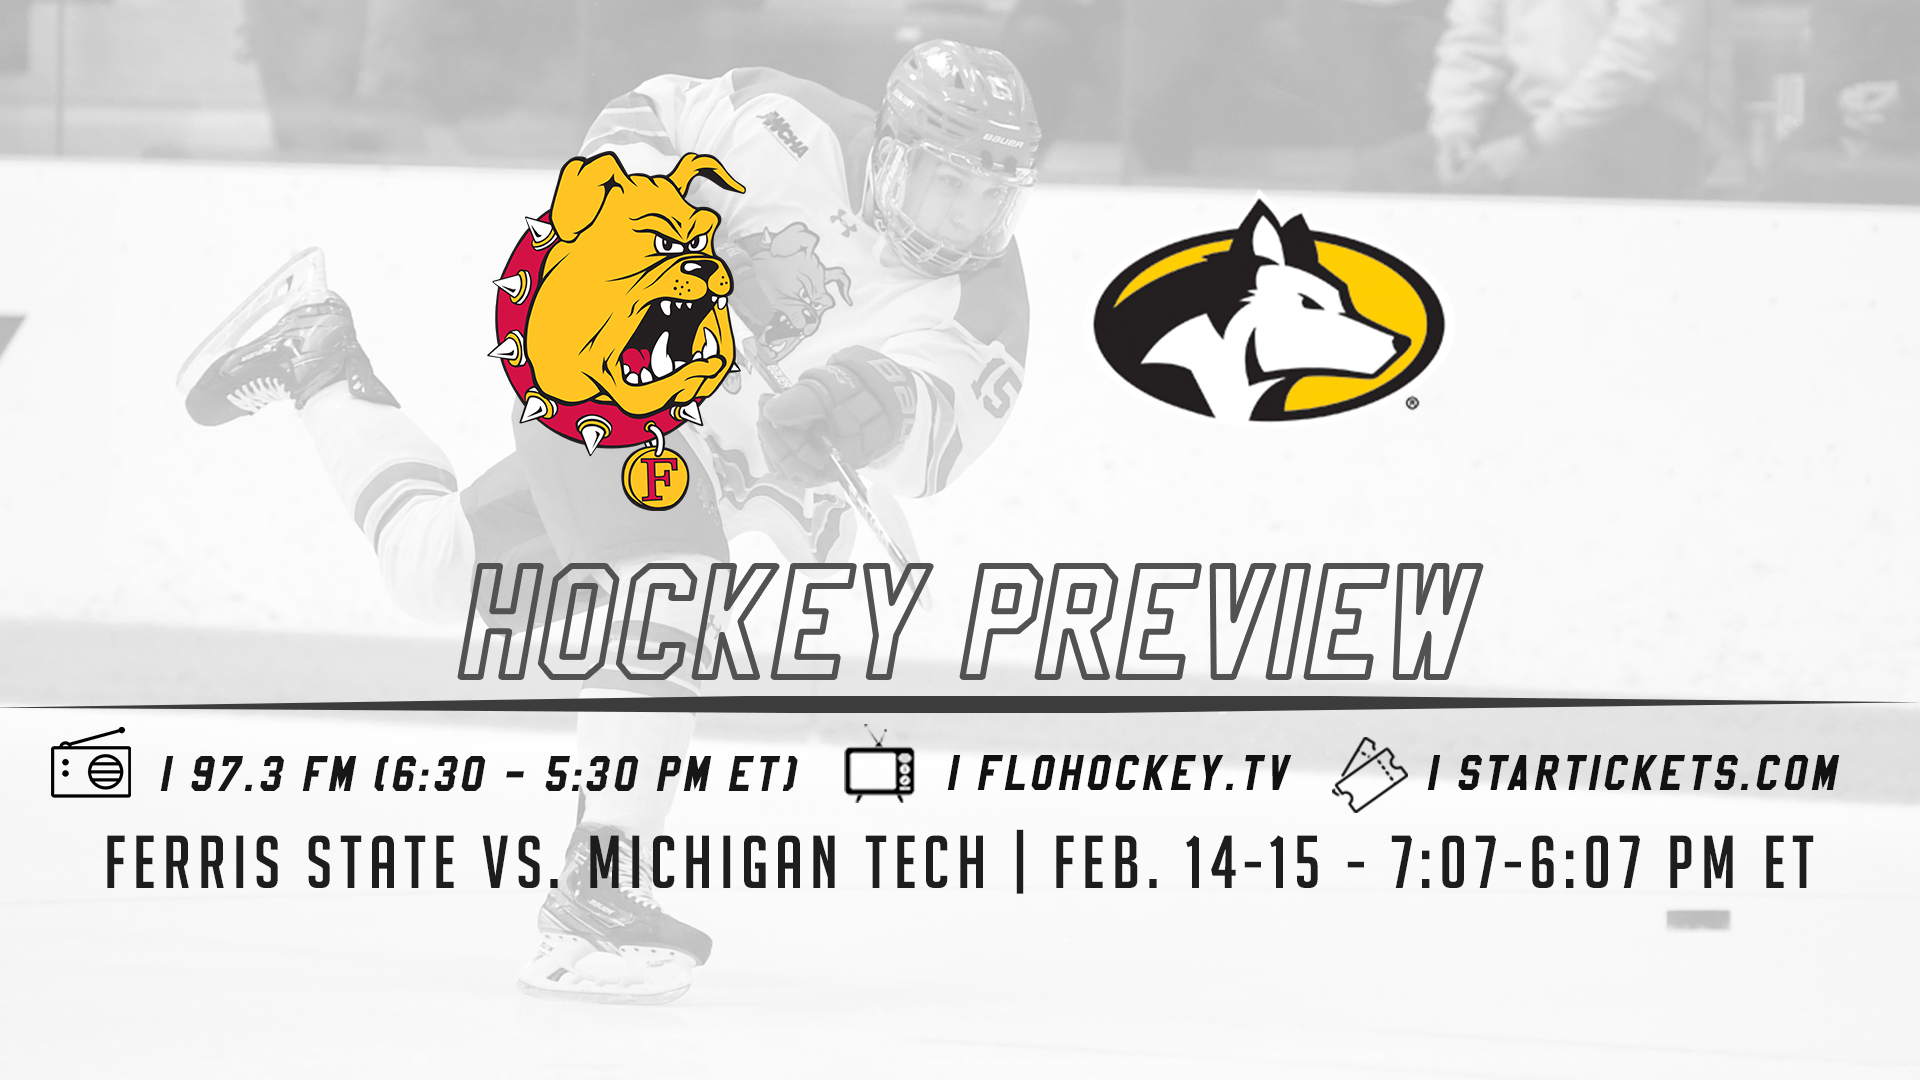 PREVIEW: Bulldogs Return Home And Set For Key Weekend Series Vs. Michigan Tech